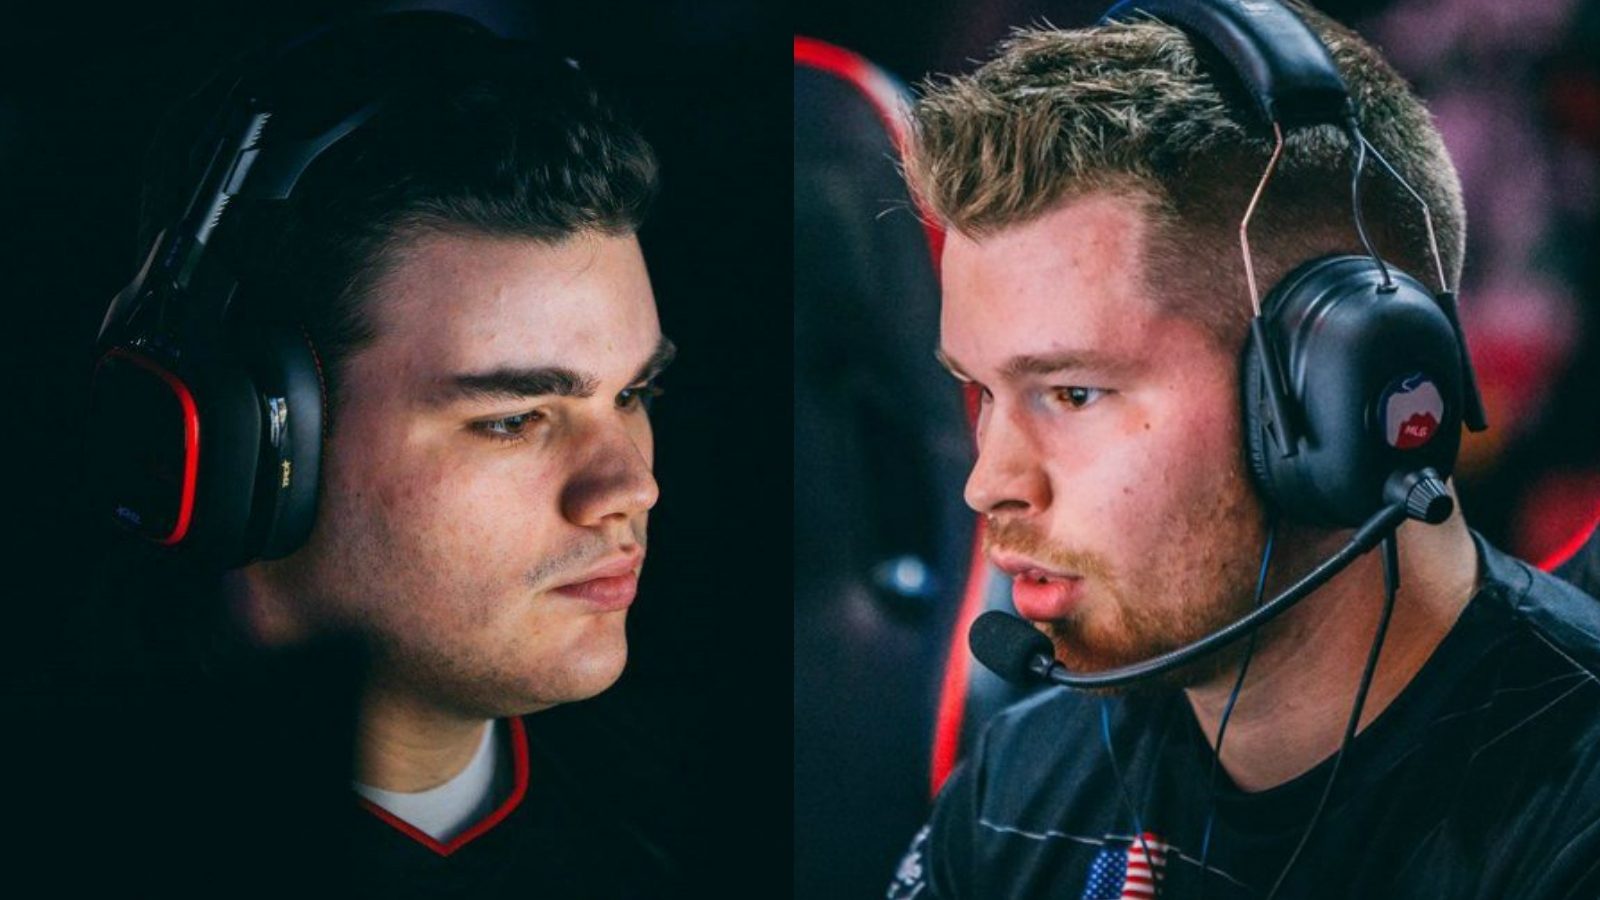 OpTic Gaming’s Crimsix all but confirms Methodz being dropped from CoD ...